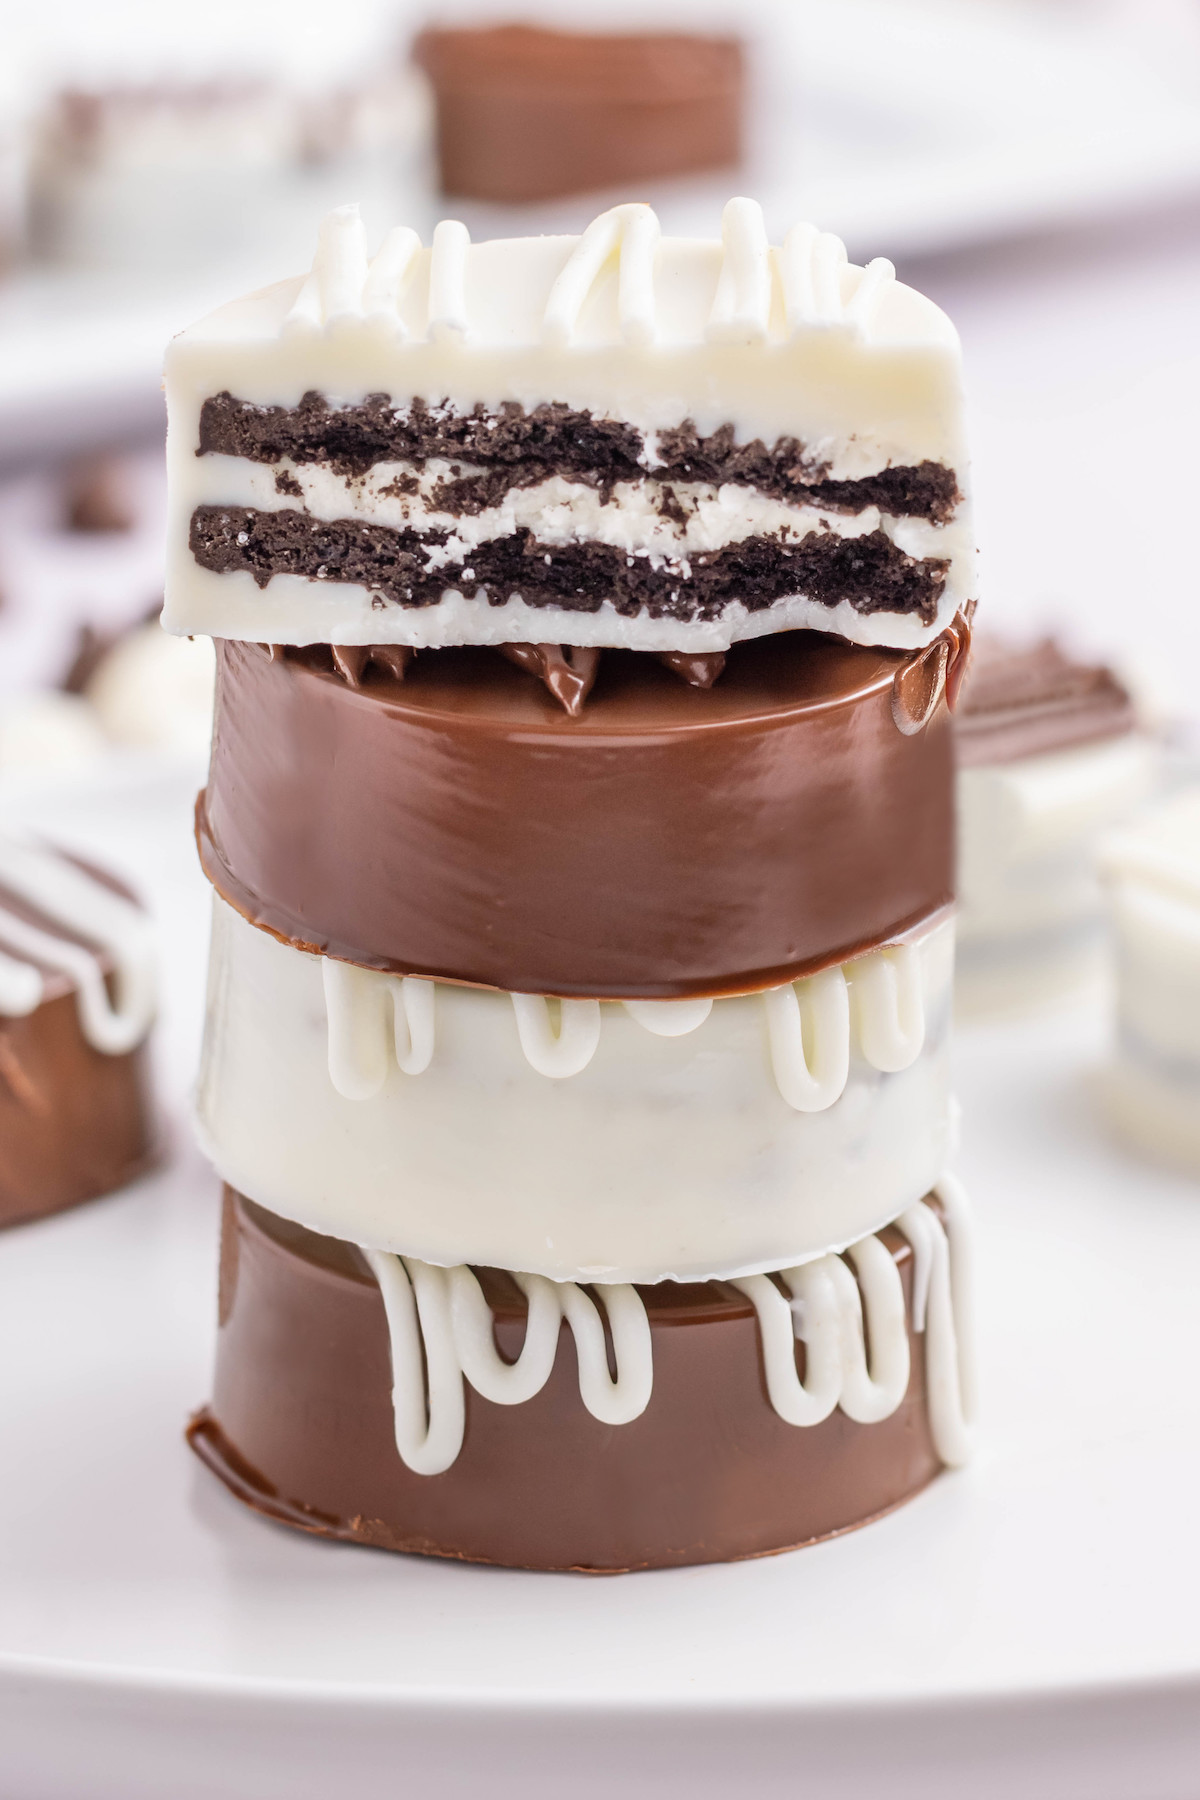 Four white and milk chocolate covered Oreos stacked on top of each other. The top one is cut in half to see the cookie inside.